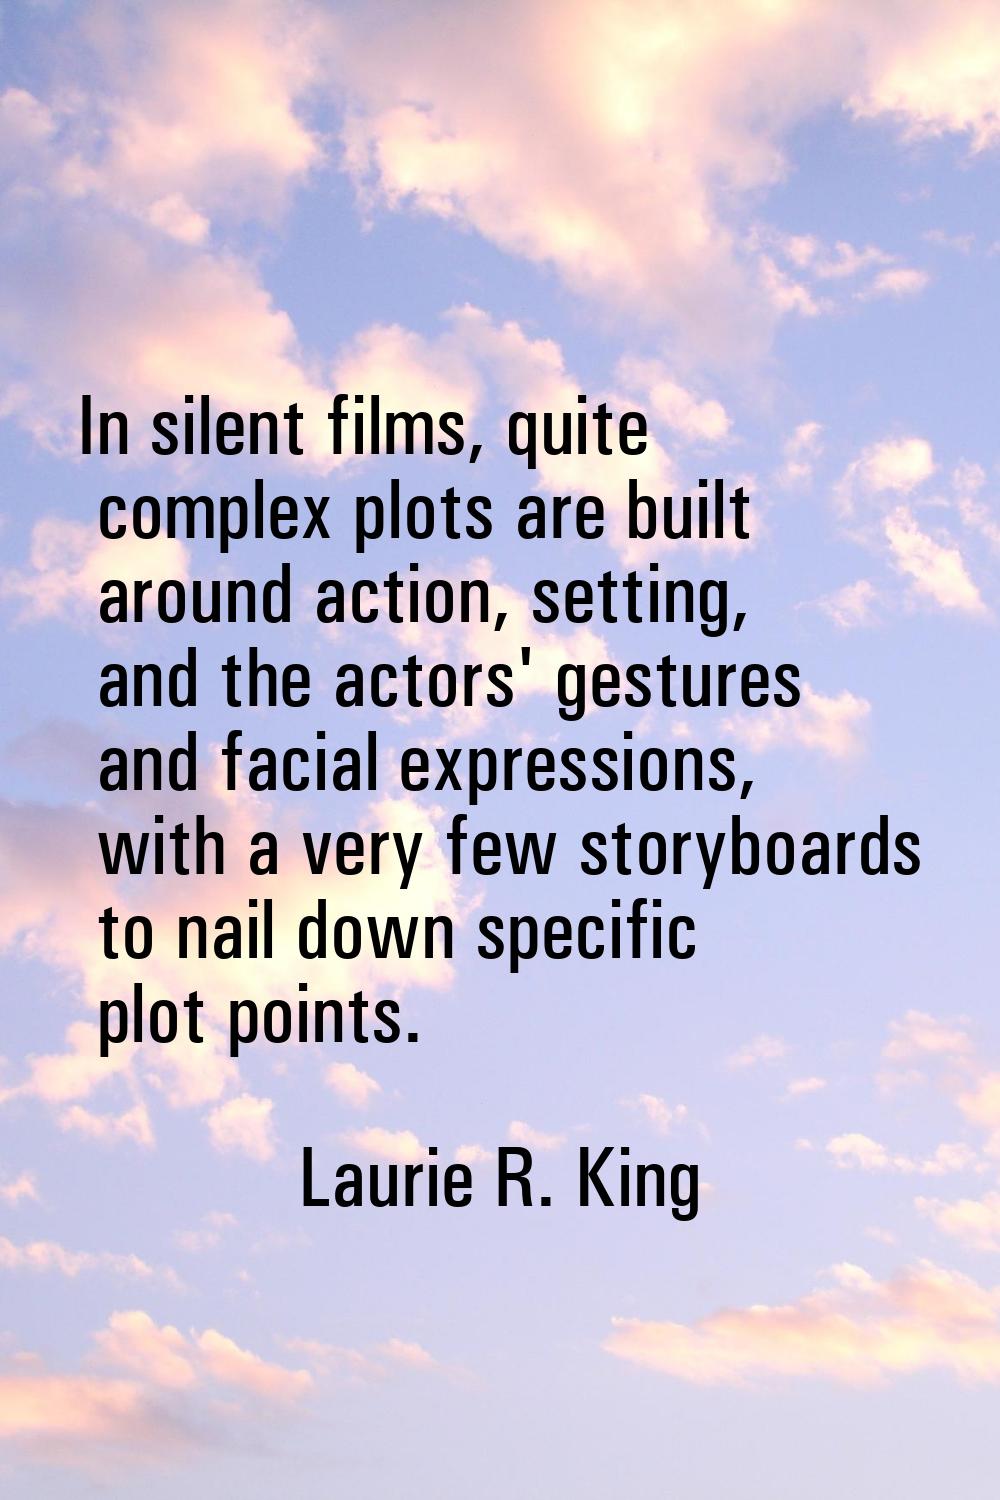 In silent films, quite complex plots are built around action, setting, and the actors' gestures and